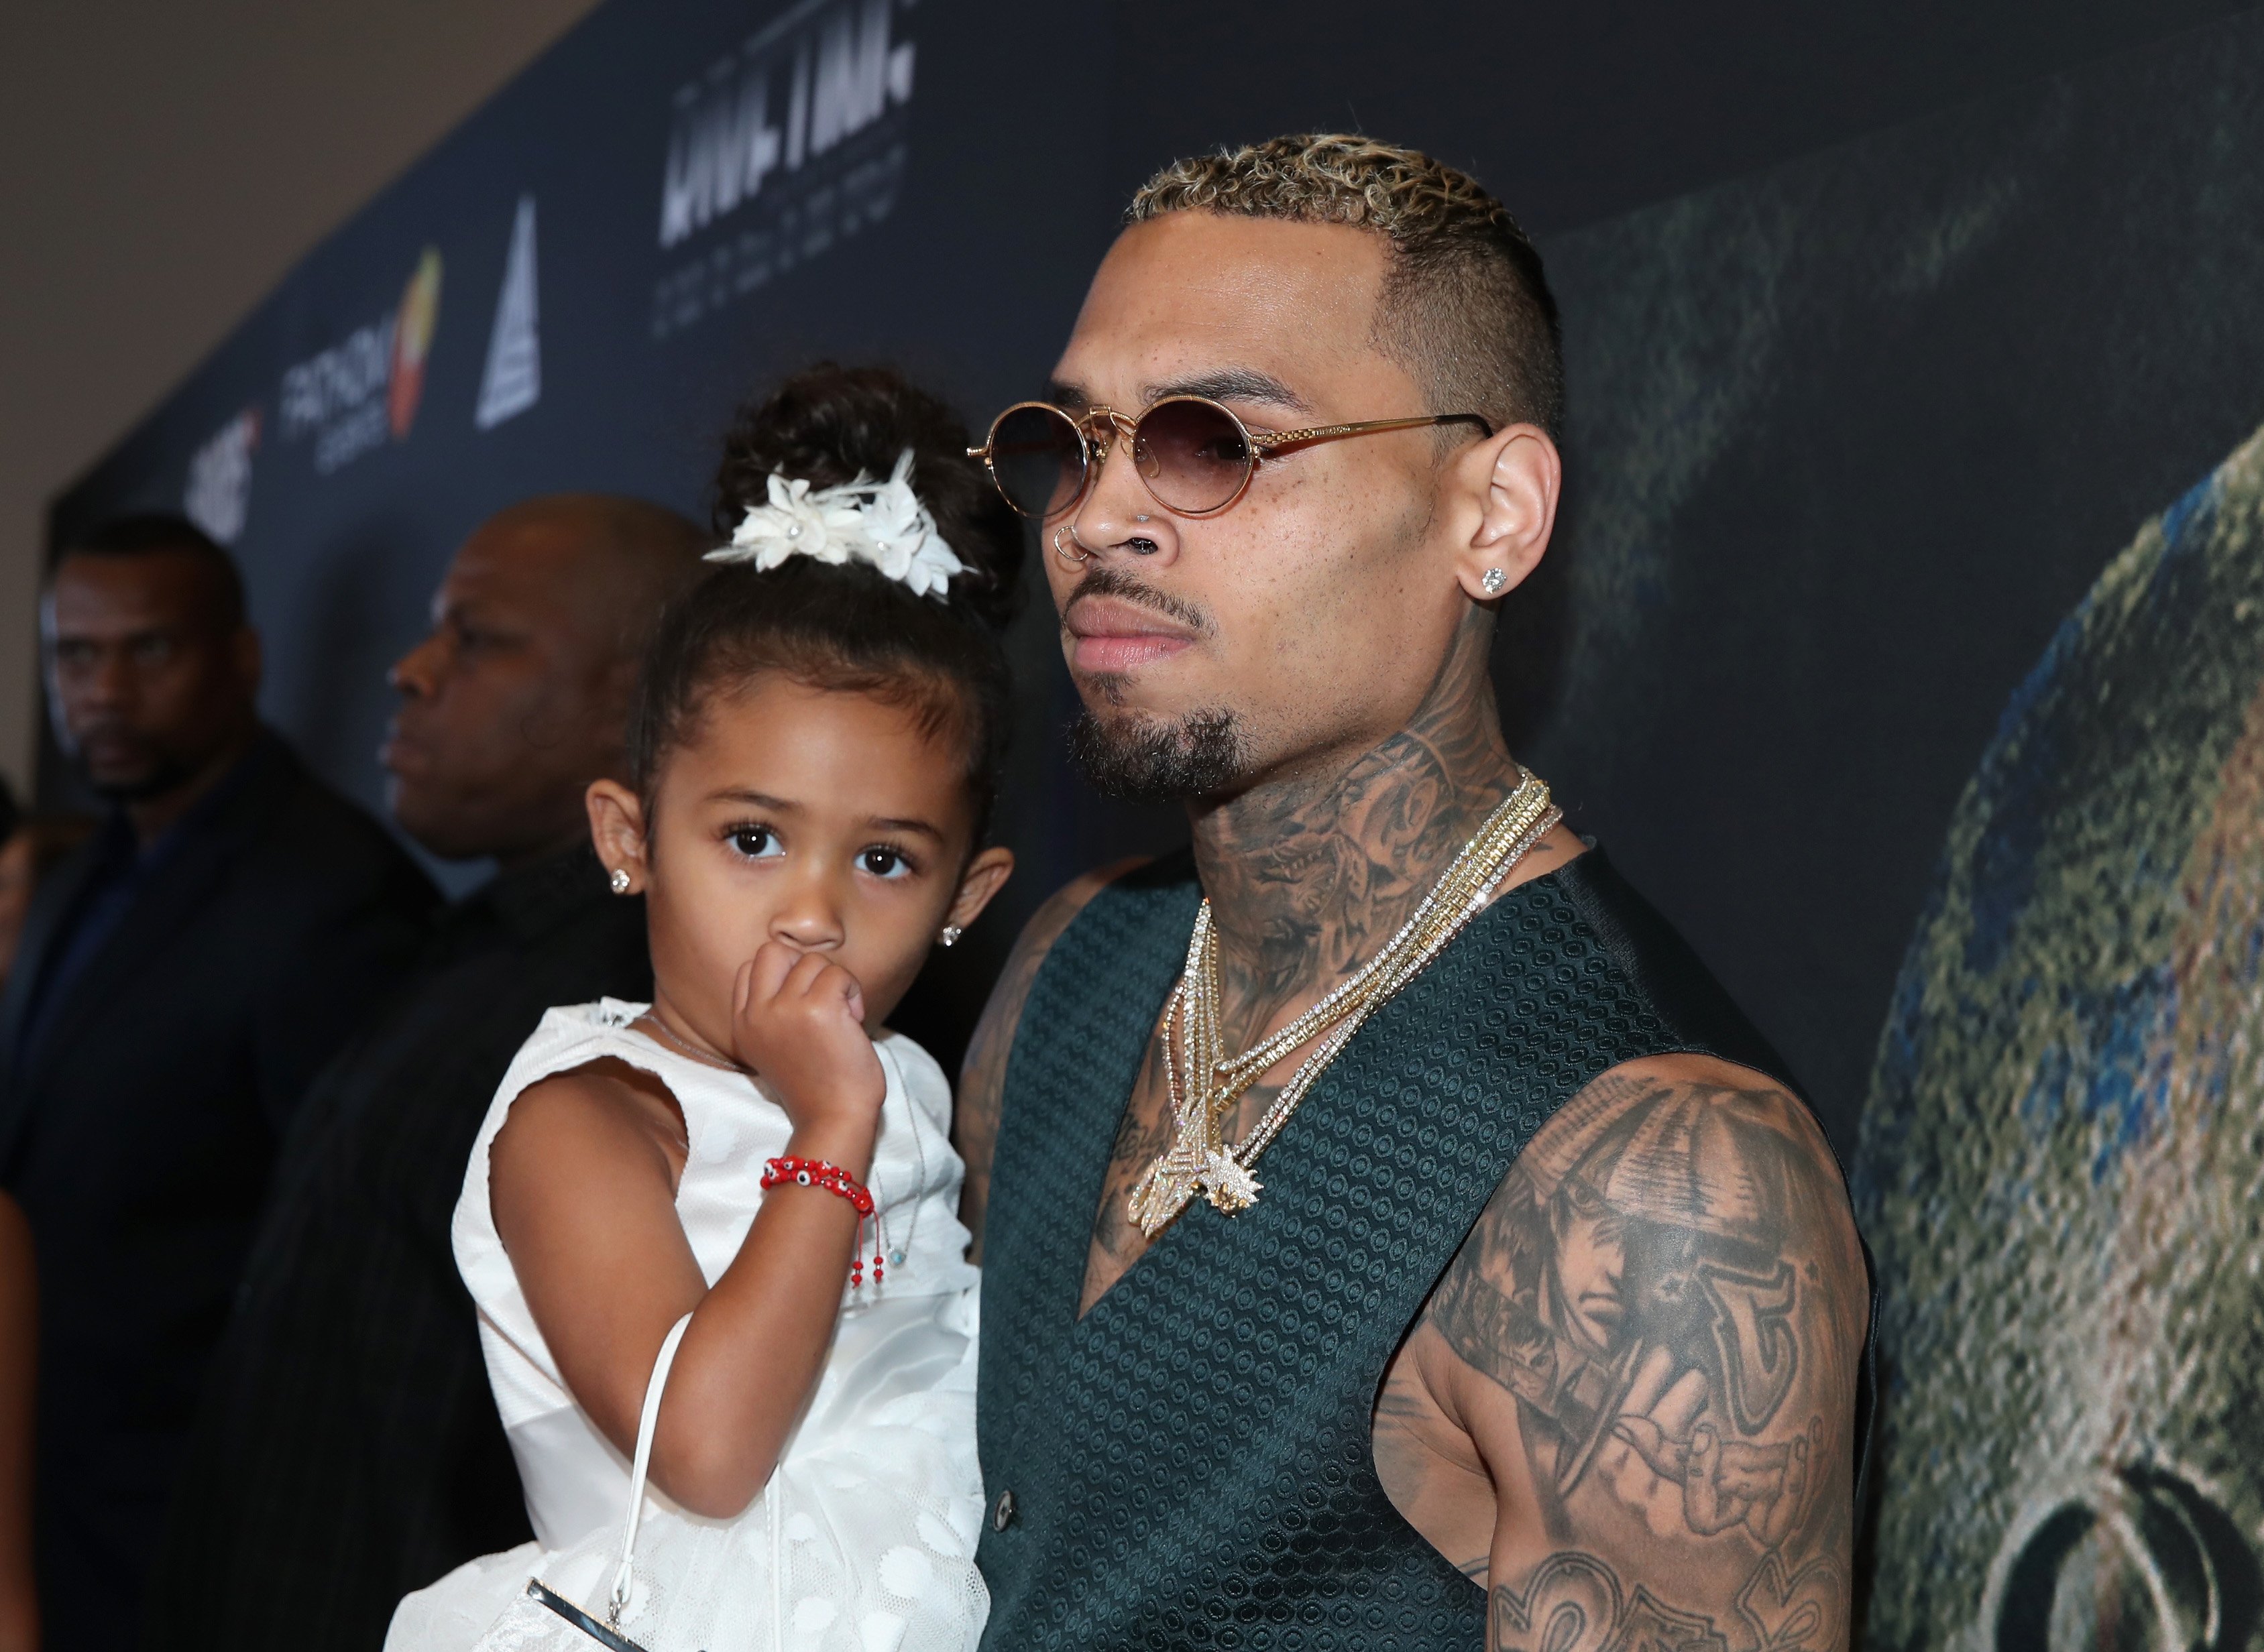 Chris Brown and Royalty Brown at the premiere of "Chris Brown: Welcome To My Life" at L.A. LIVE on June 6, 2017 in Los Angeles, California.| Source: Getty Images